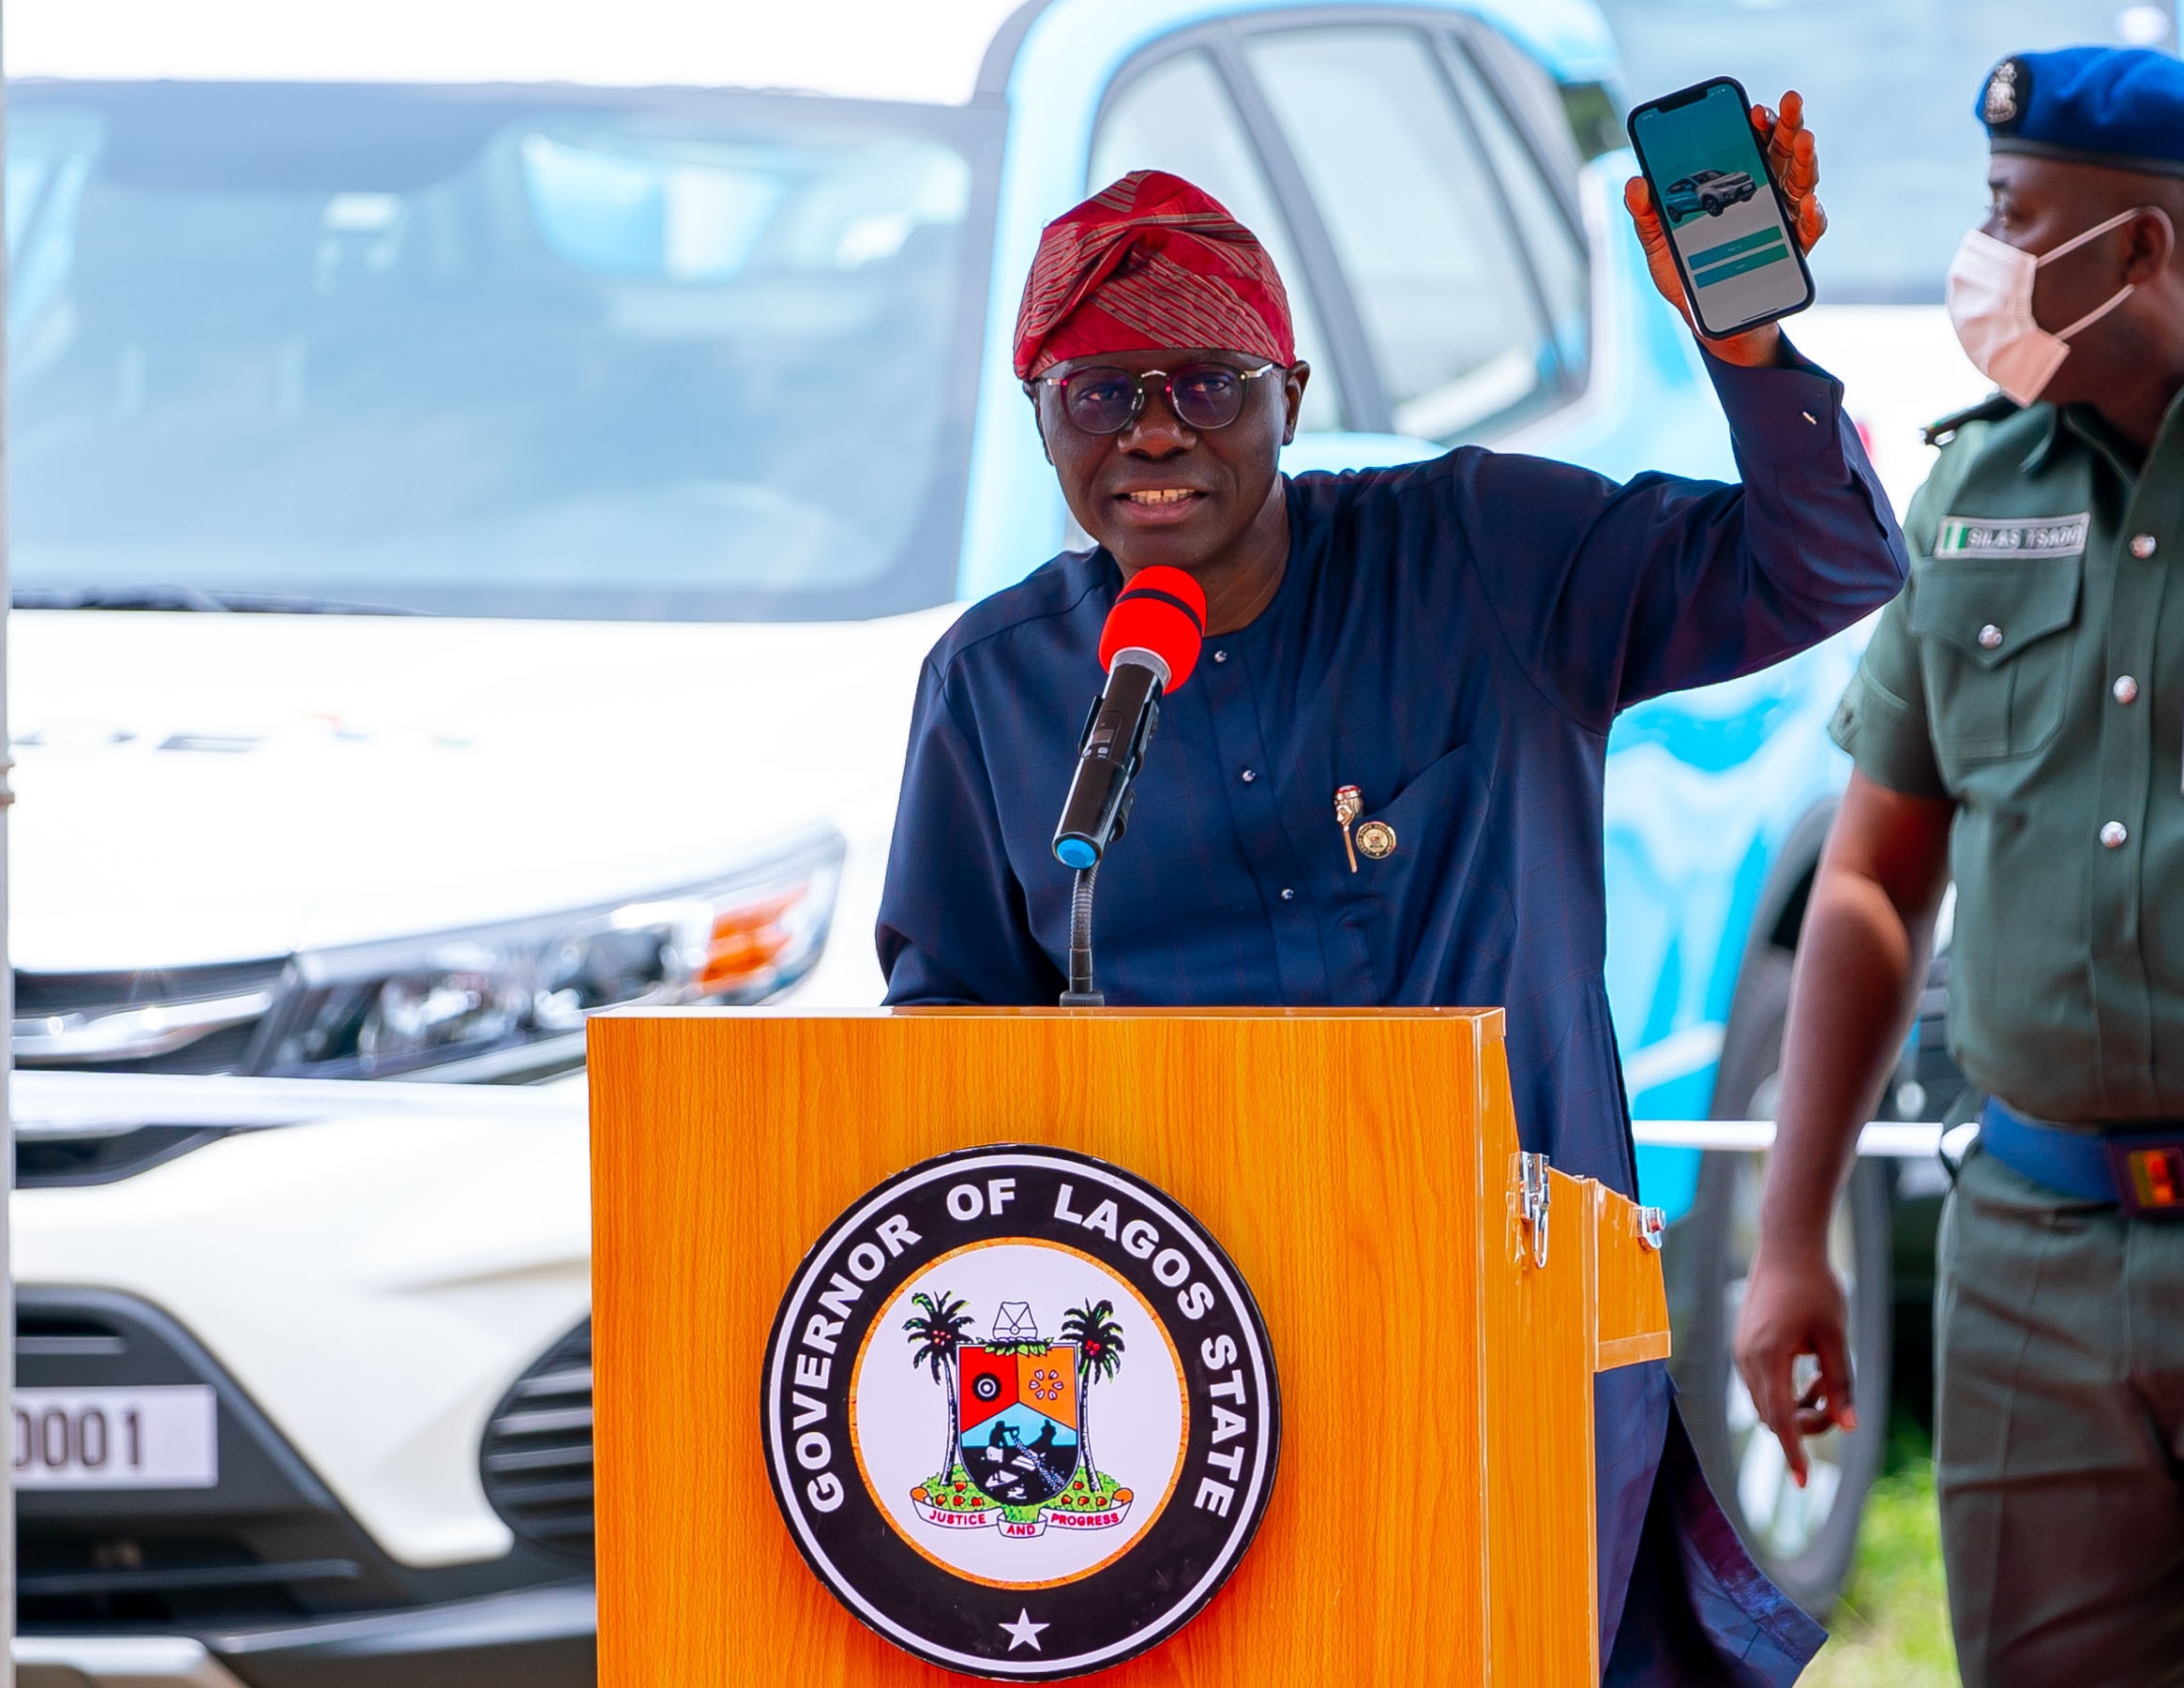 SANWO-OLU LAUNCHES TECH-DRIVEN LAGOS RIDE TAXI SCHEME, ROLLS OUT 1,000 BRAND-NEW CARS